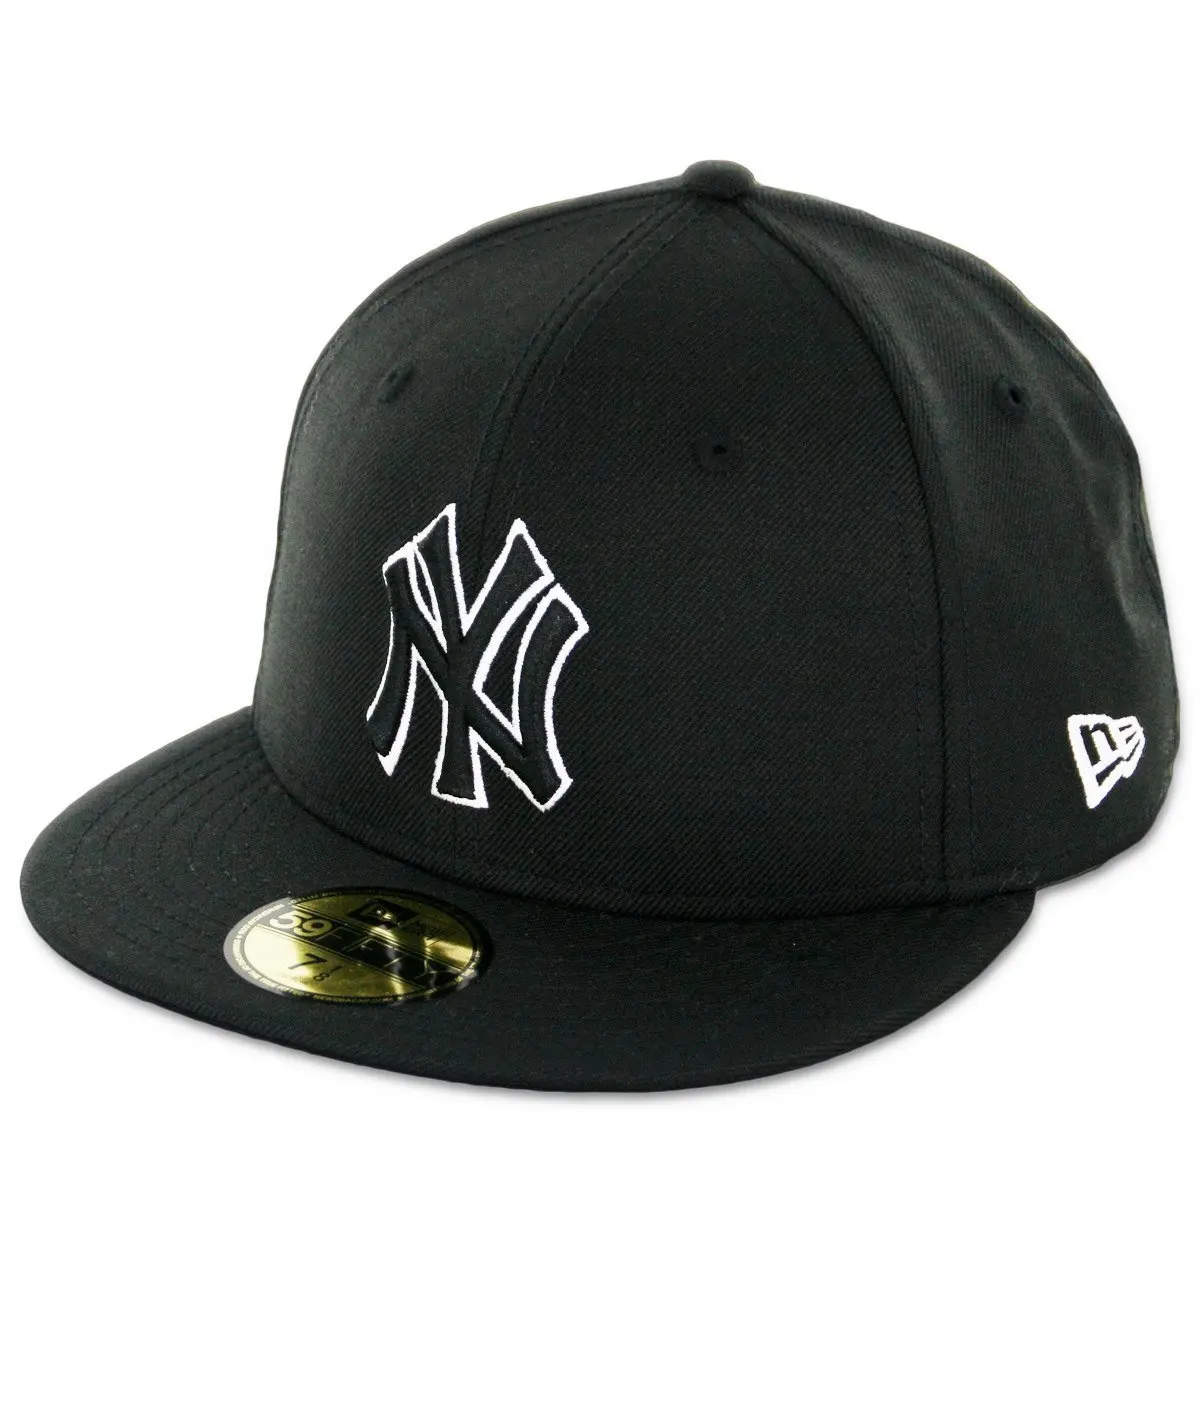 Cheap Black Fitted Hats New Era, find Black Fitted Hats New Era deals ...